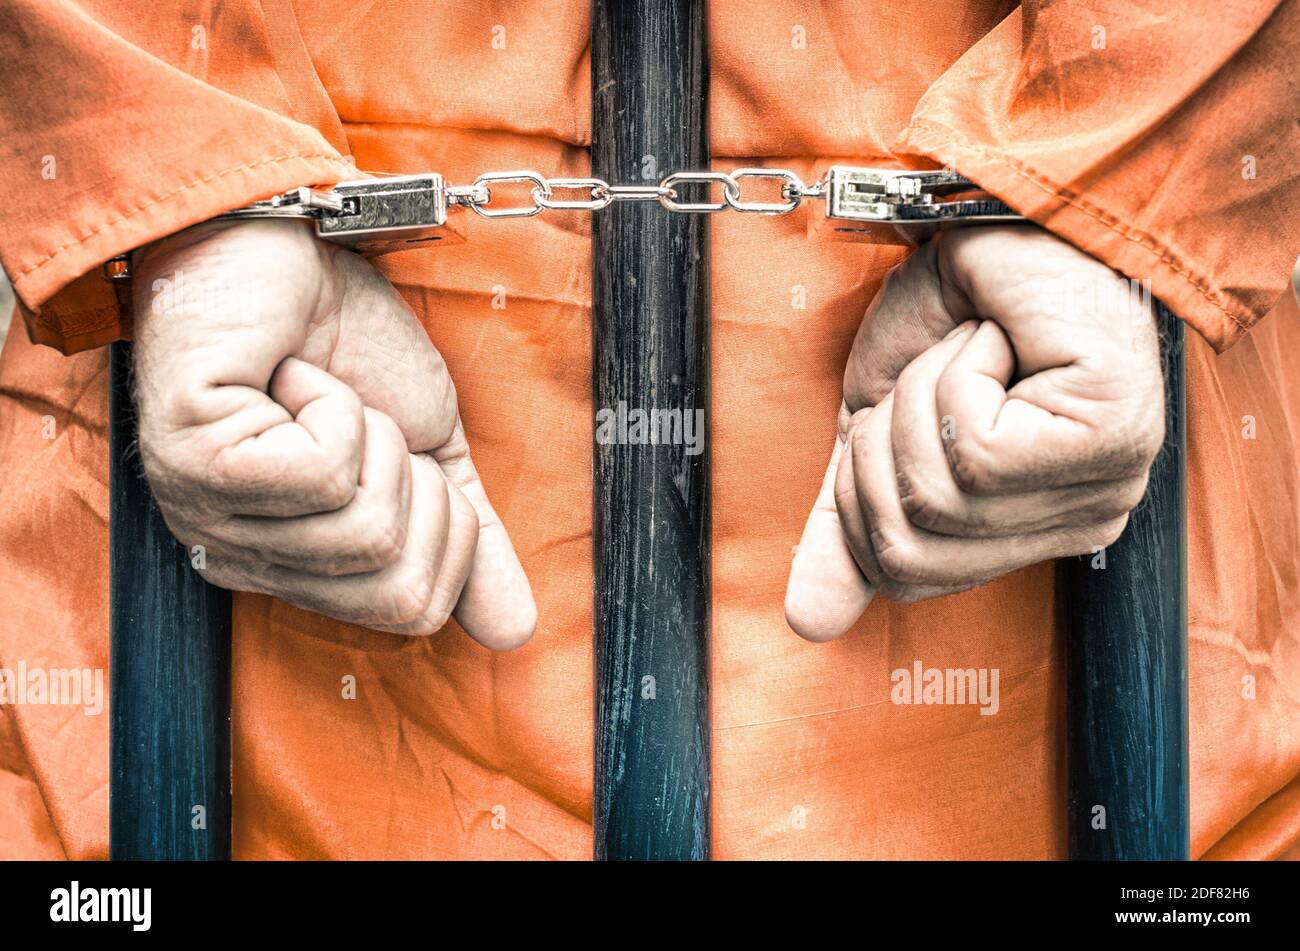 Handcuffed Hands Of A Prisoner Behind The Bars Of A Prison With Orange Clothes Crispy